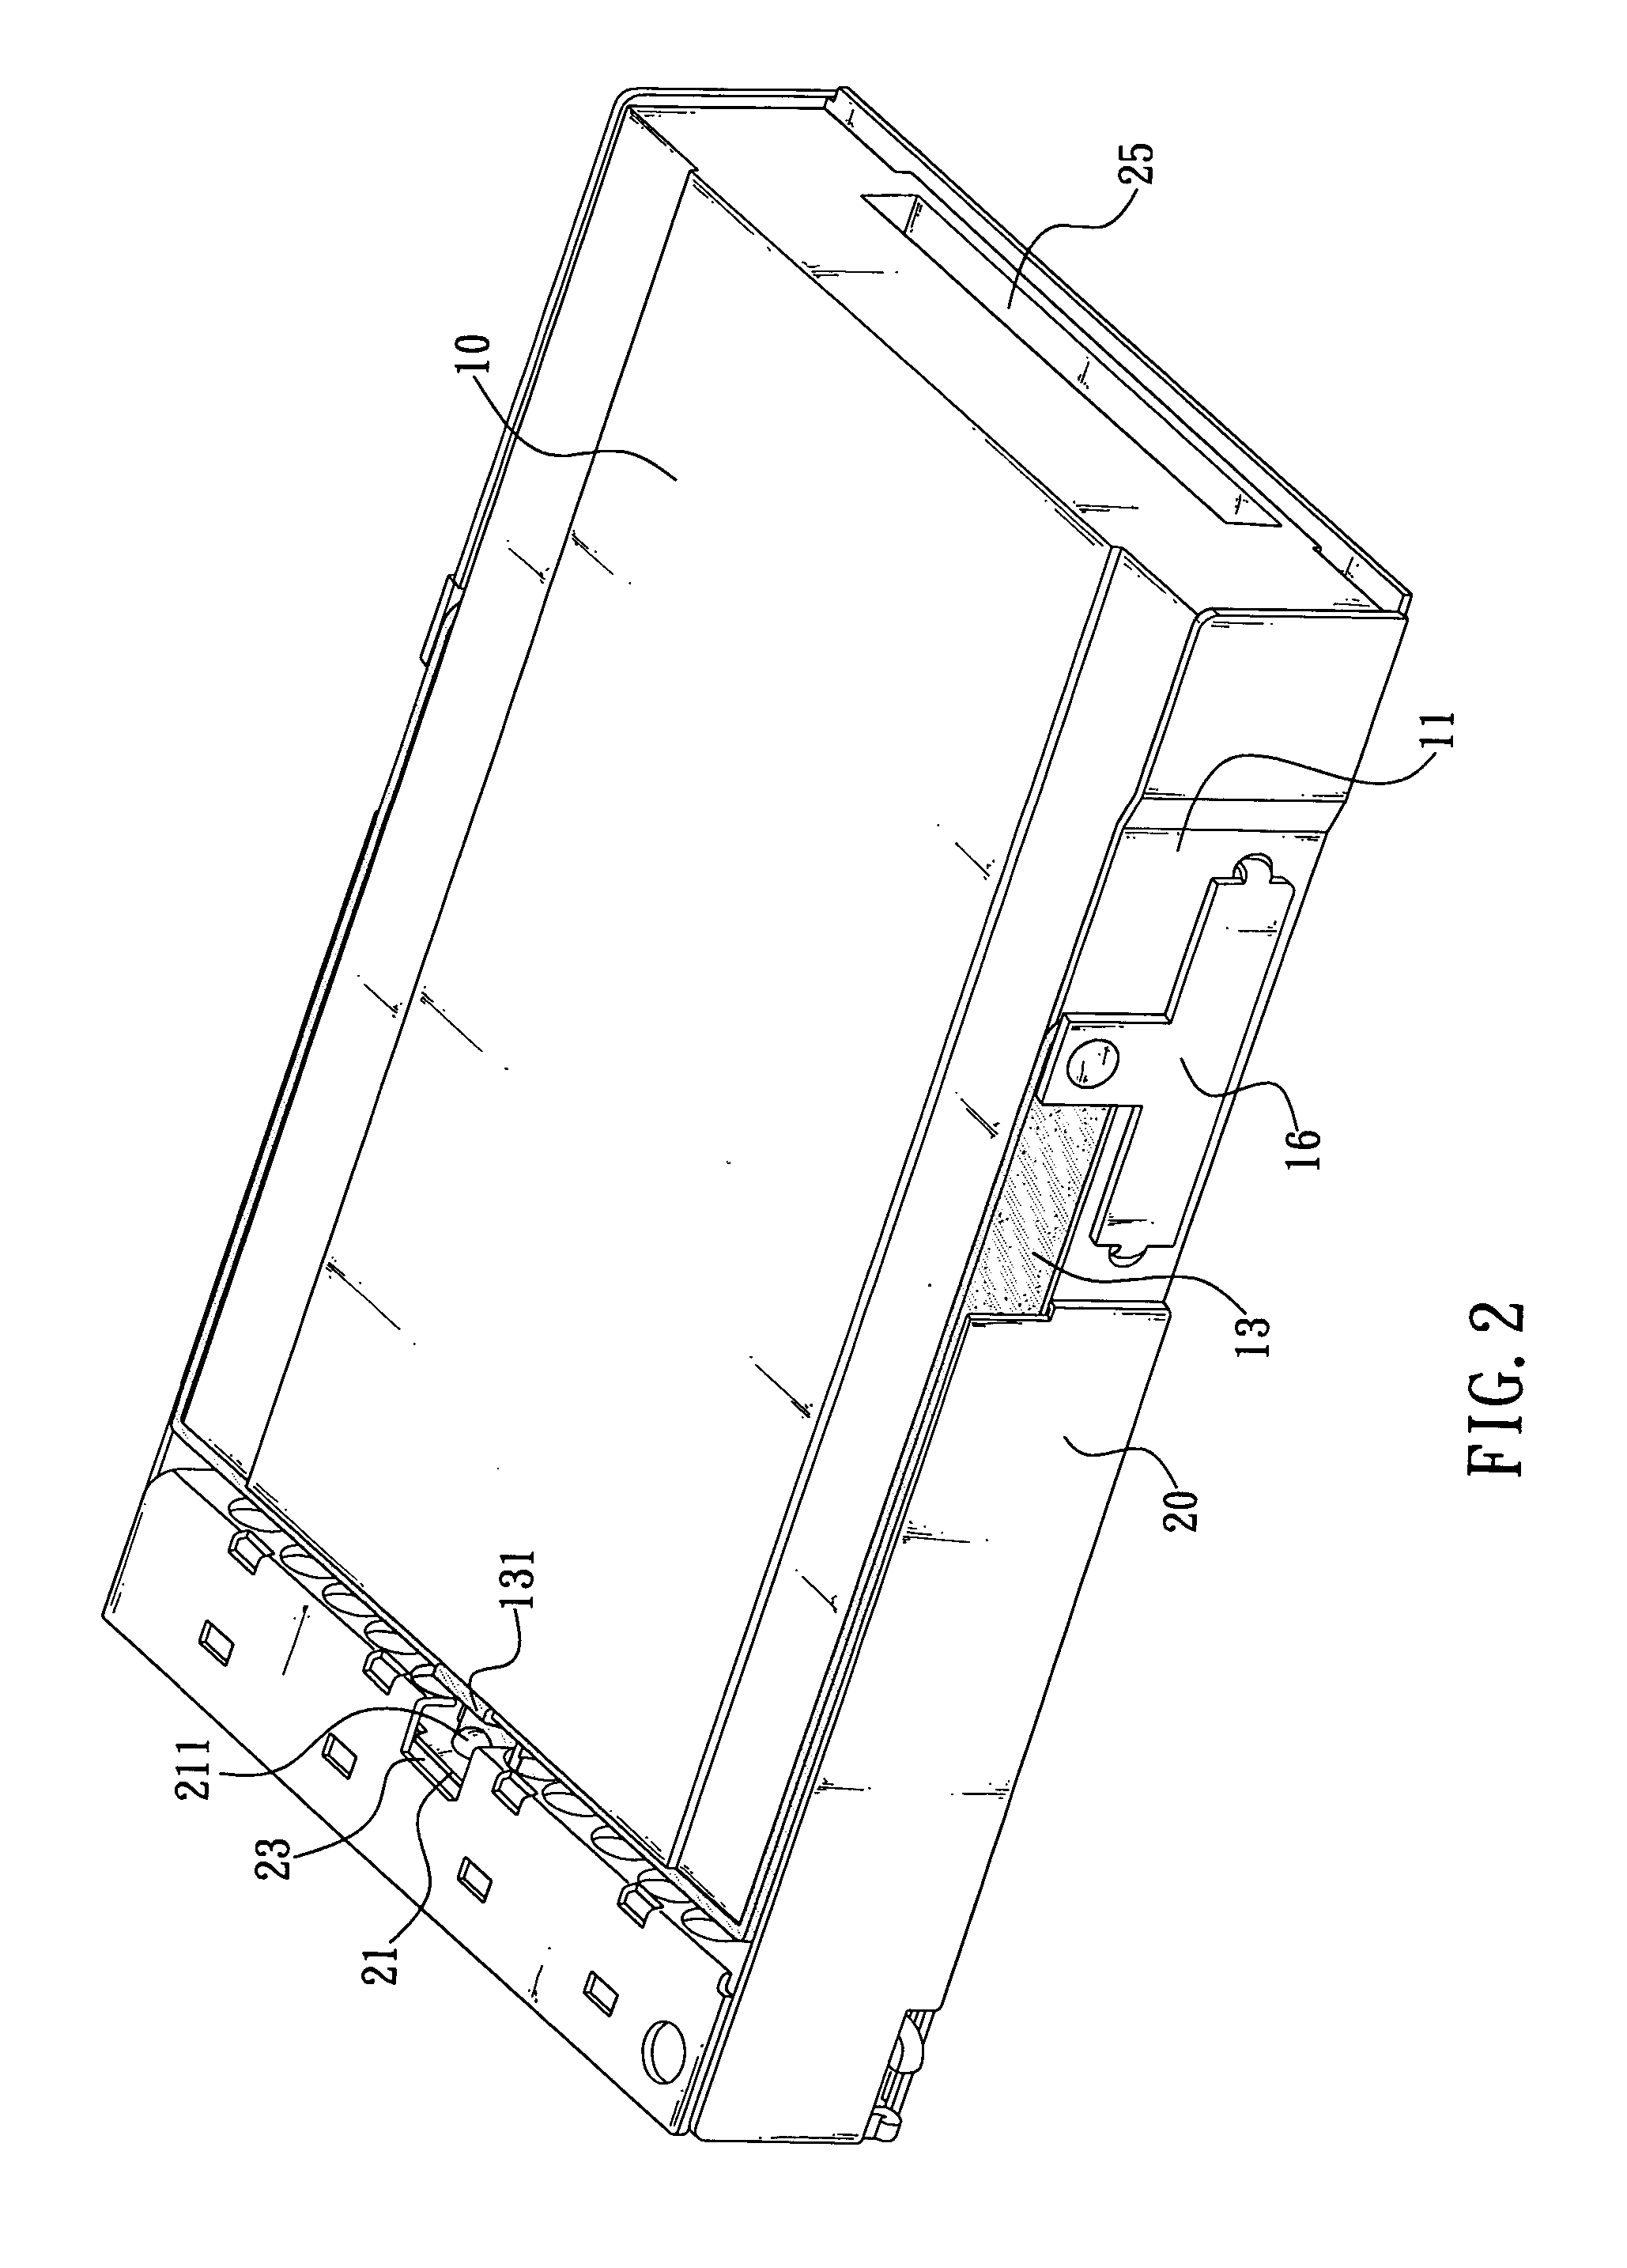 Mechanism for rapidly installing and detaching hard disk